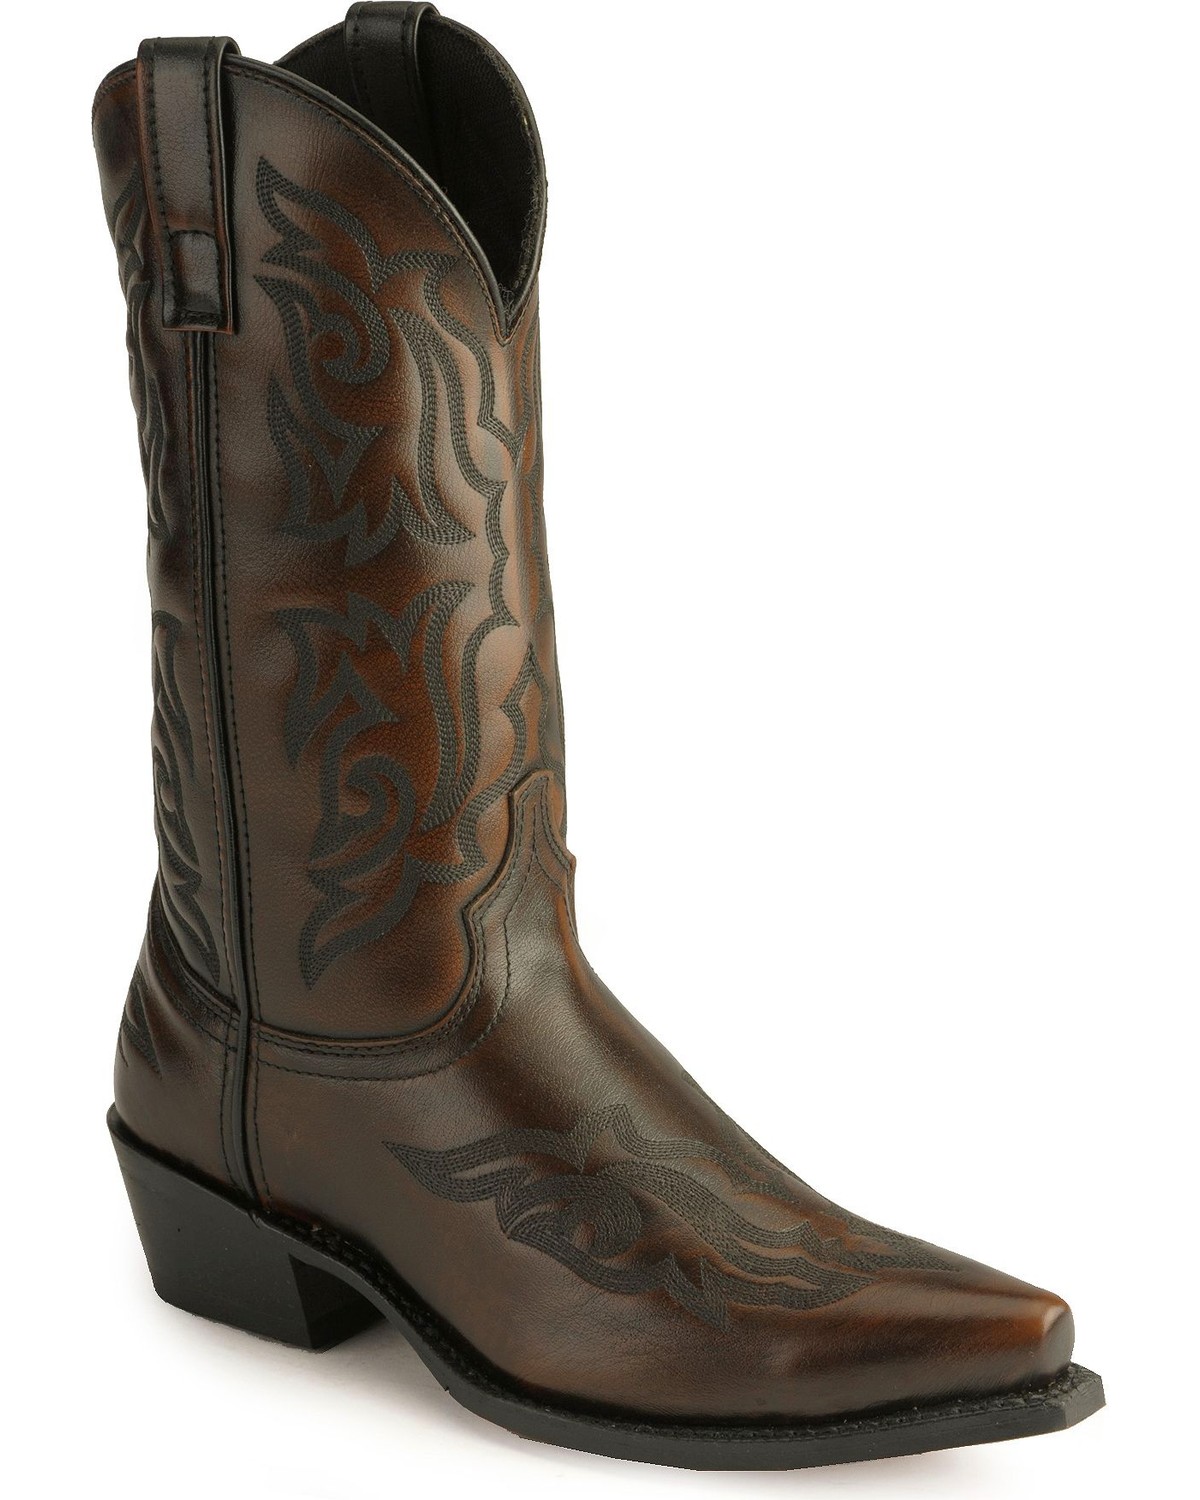 Laredo Hawk Cowboy Boots - Country Outfitter